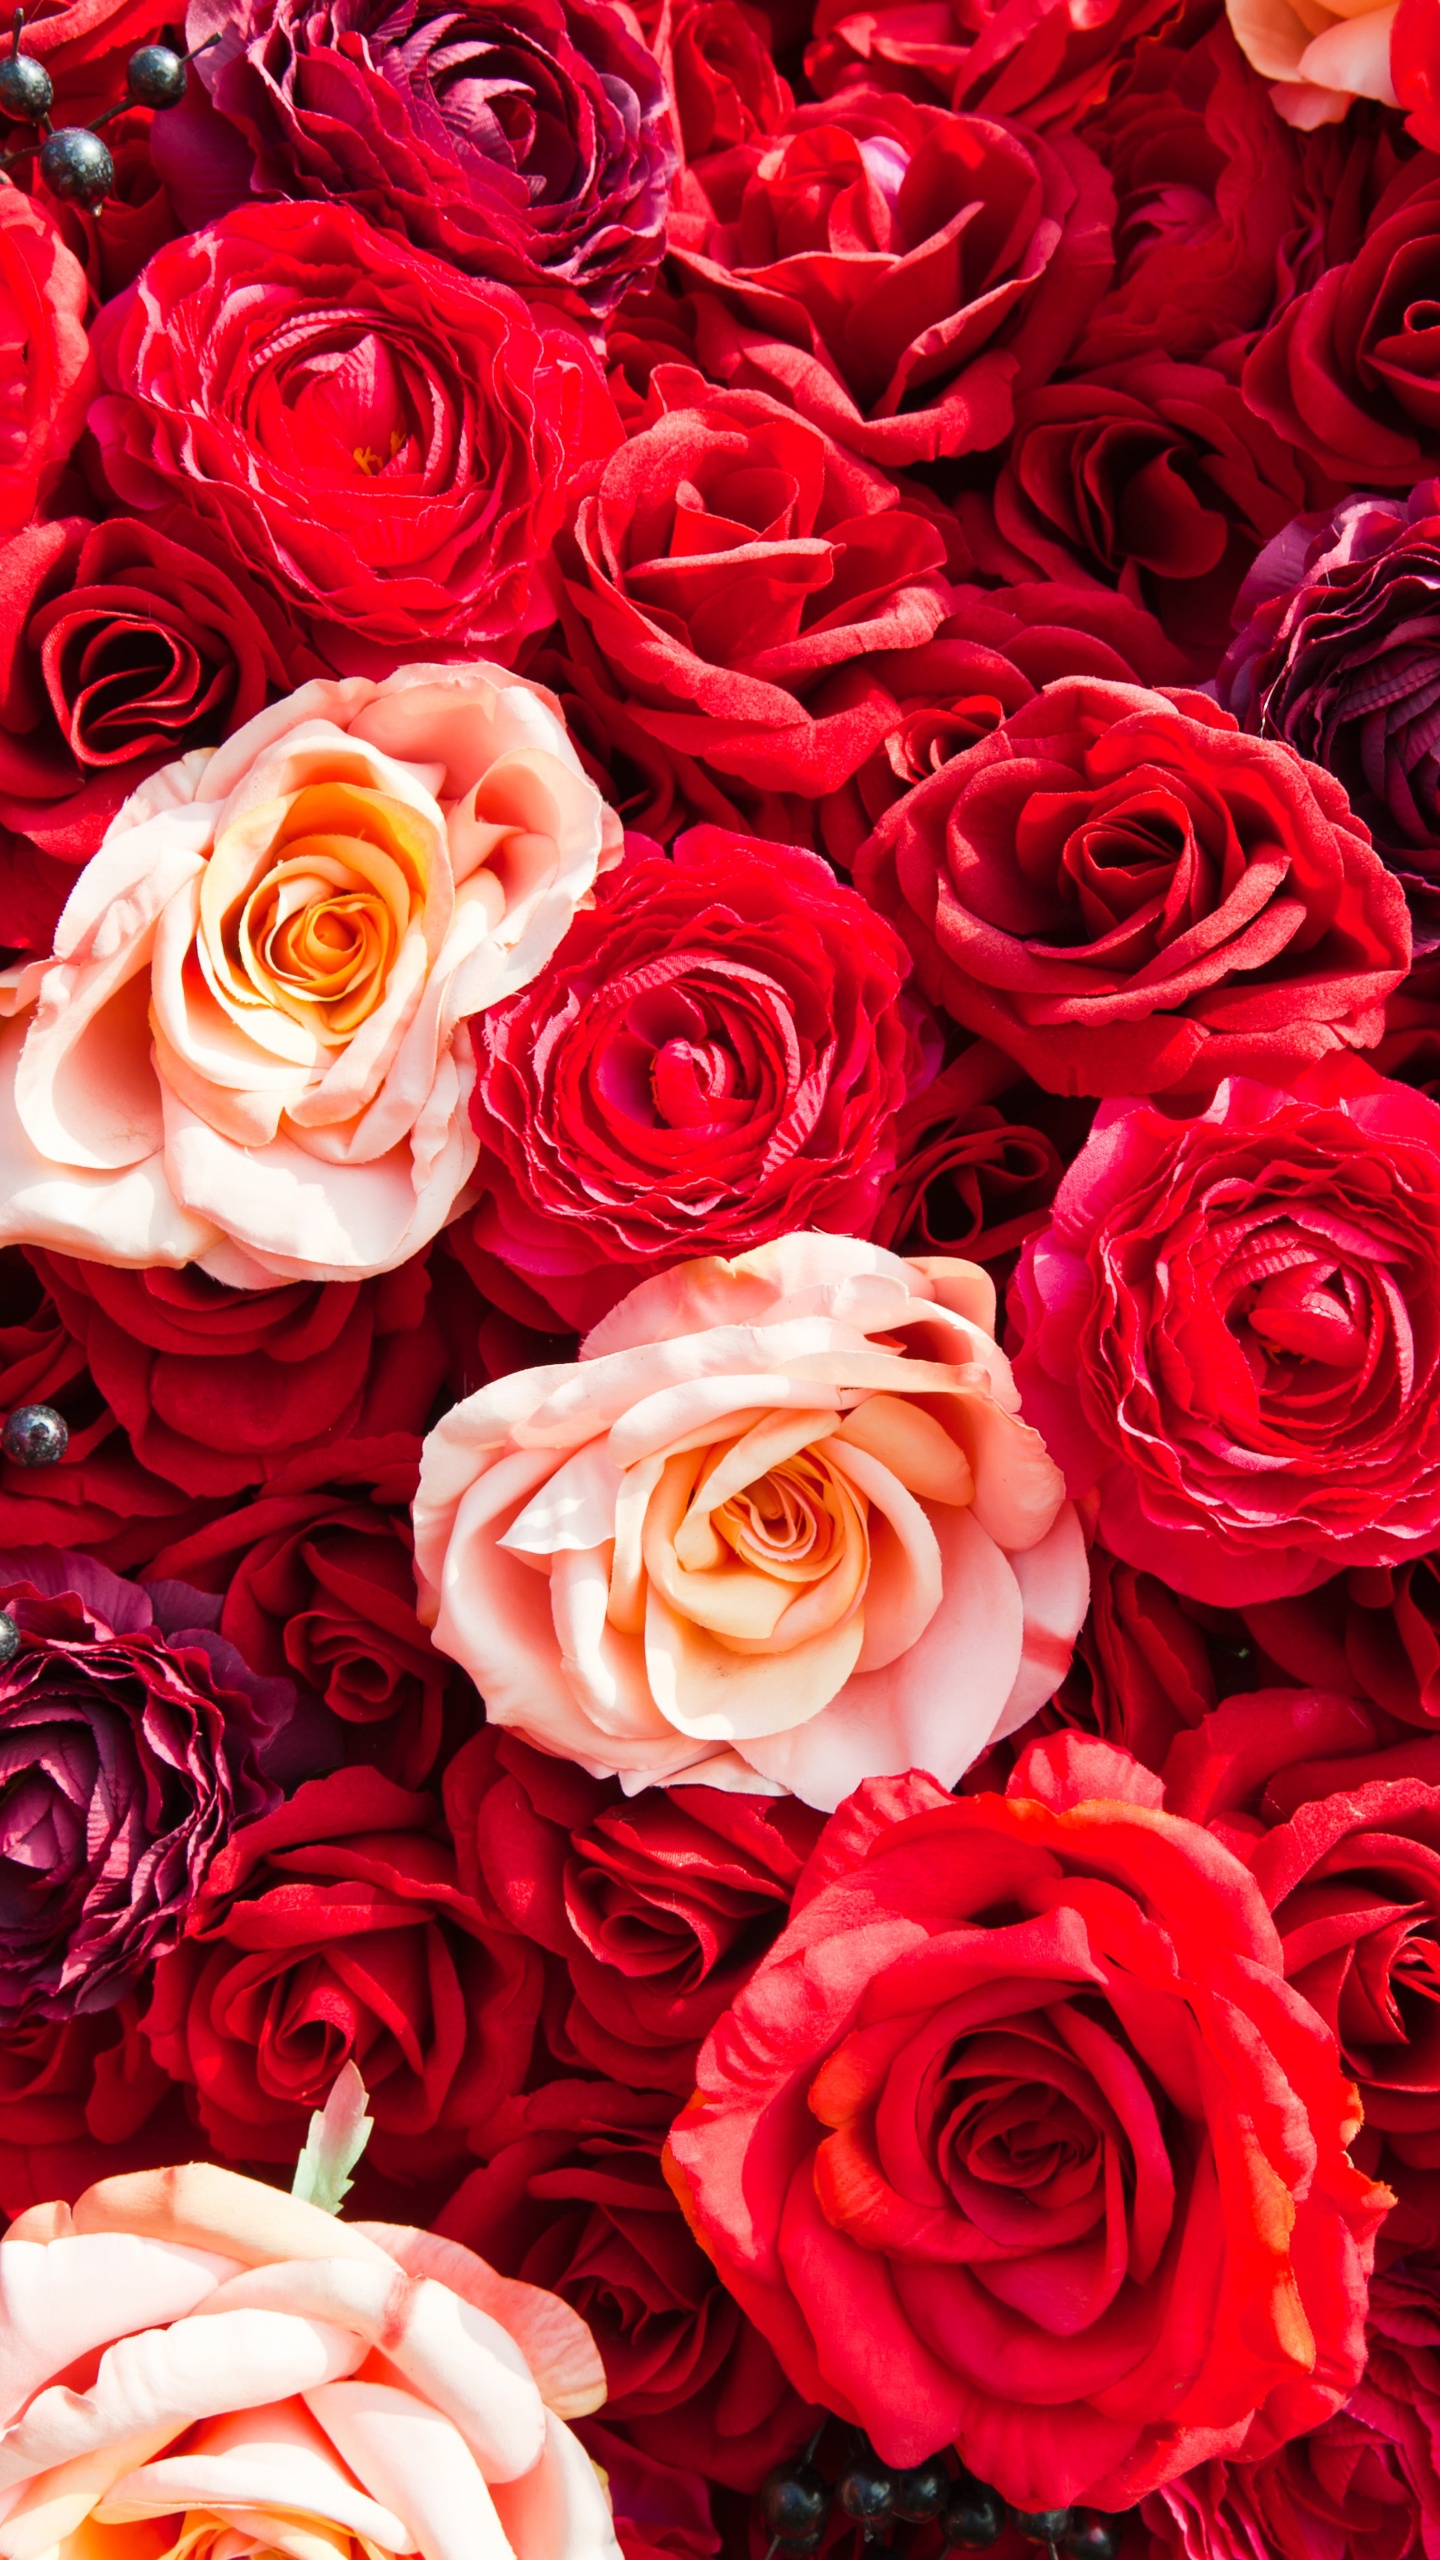 Red and White Roses Bouquet. Wallpaper in 1440x2560 Resolution